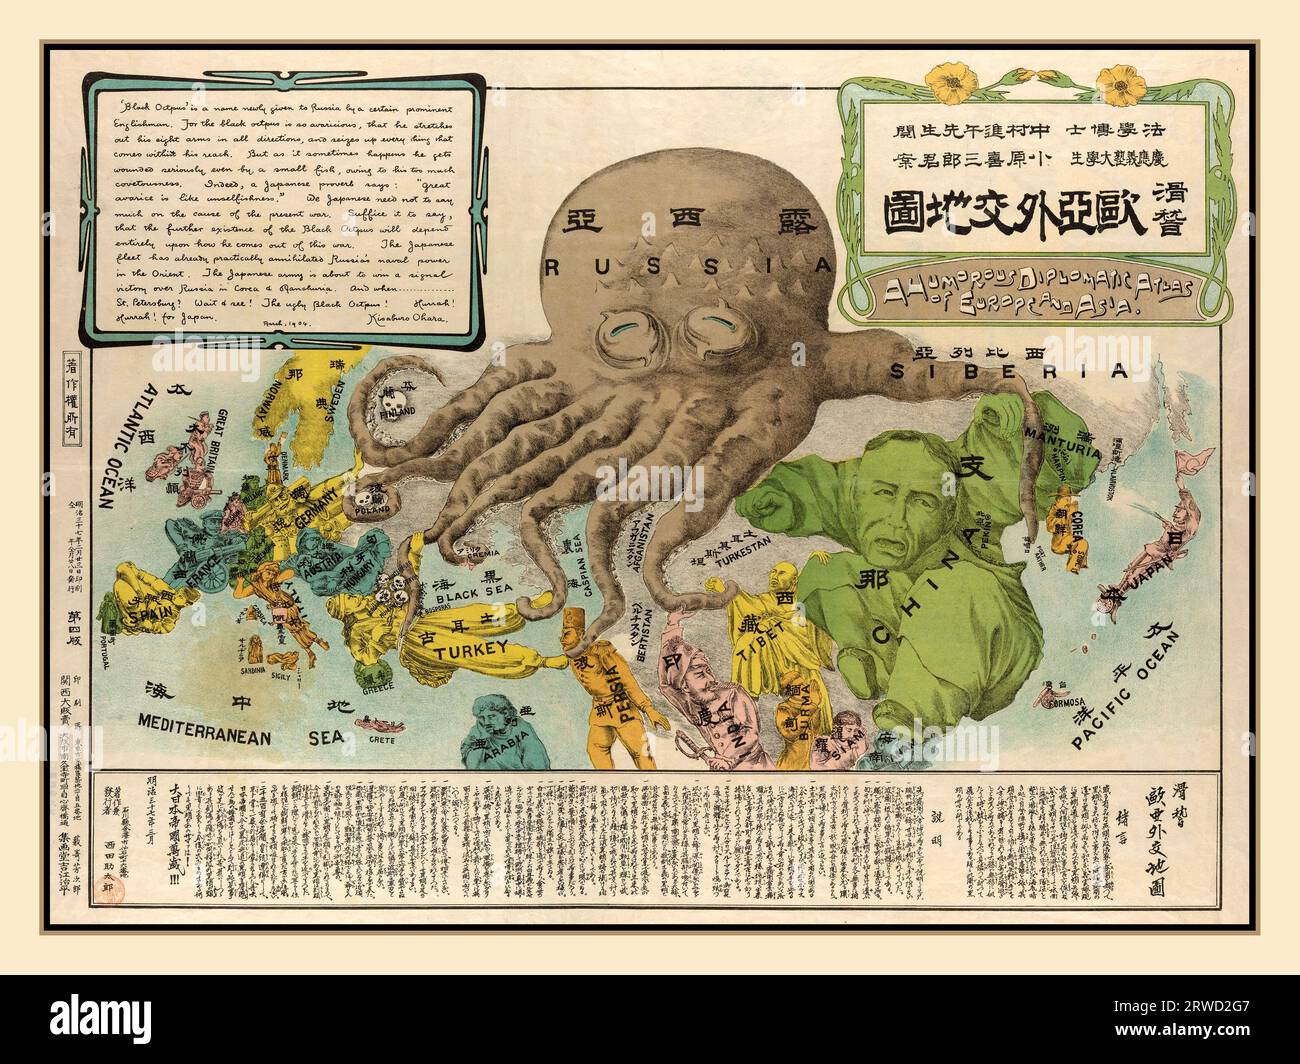 Vintage 1900s 'Humorous Diplomatic Atlas of Europe and Asia with Russia at the centre of the political landscape ' THE UGLY BLACK OCTOPUS' Stock Photo